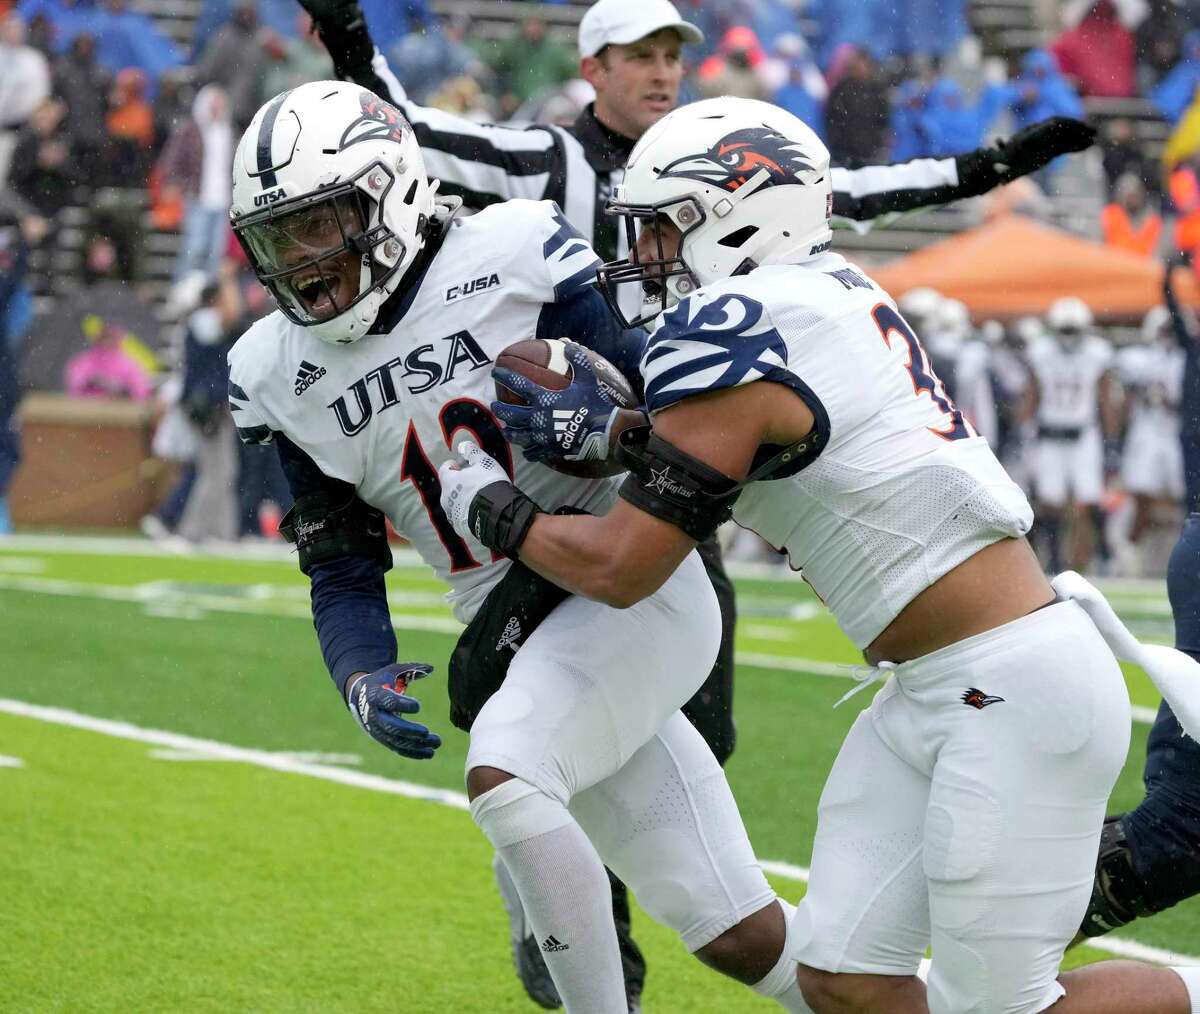 UTSA linebacker Donyai Taylor, left, celebrates with teammate Trey Moore after returning a fumble for a touchdown during the first half of Saturday’s game against Rice in Houston.